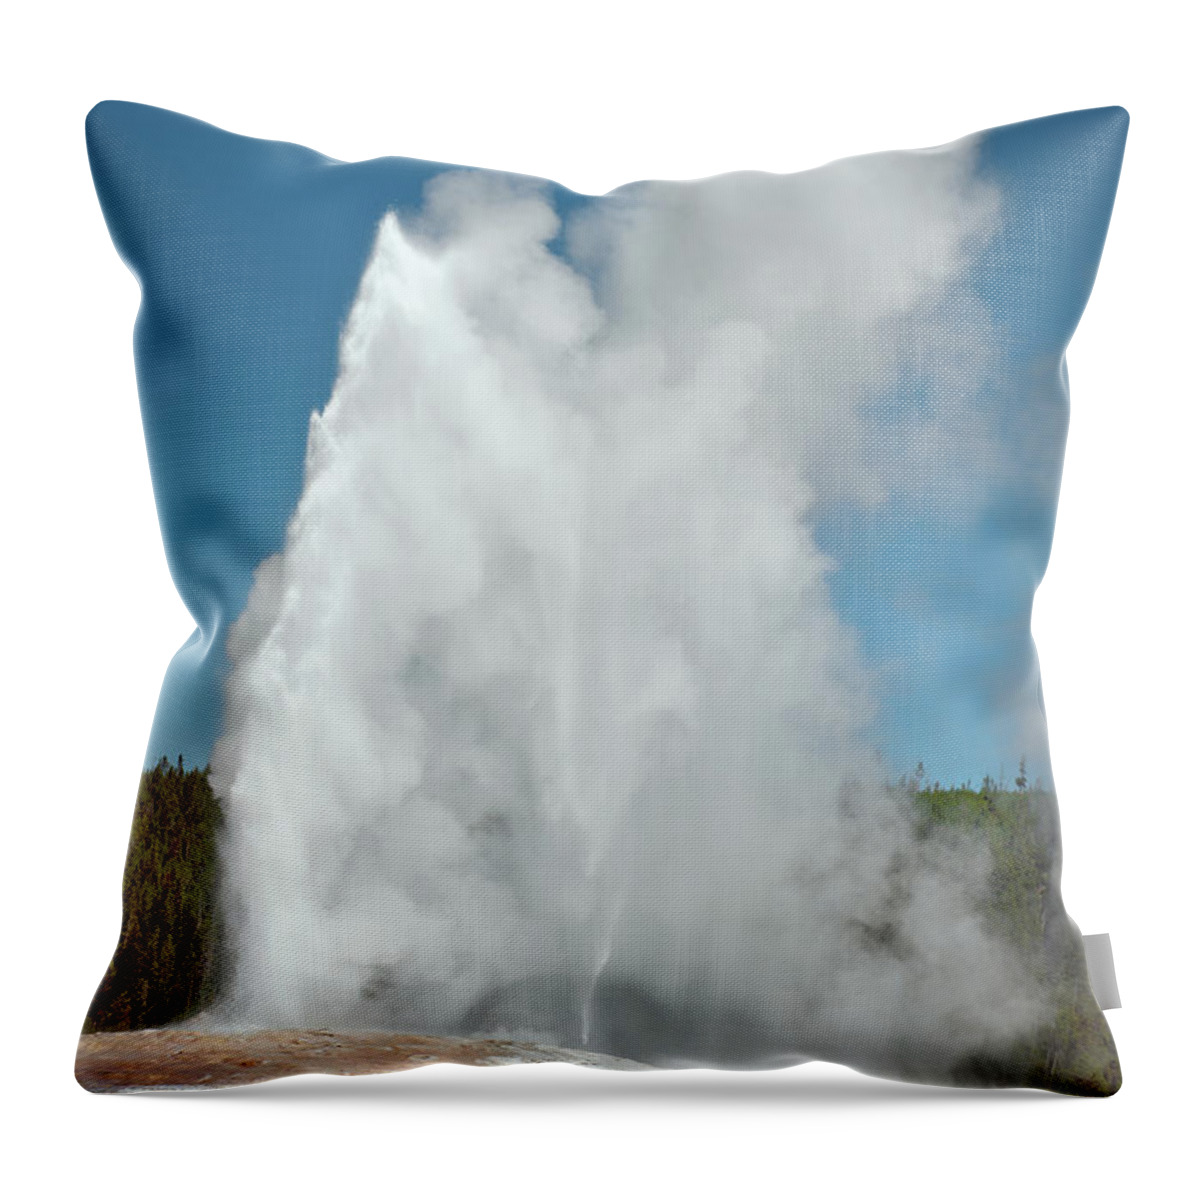 Scenics Throw Pillow featuring the photograph Old Faithful In Yellowstone National by Pavliha